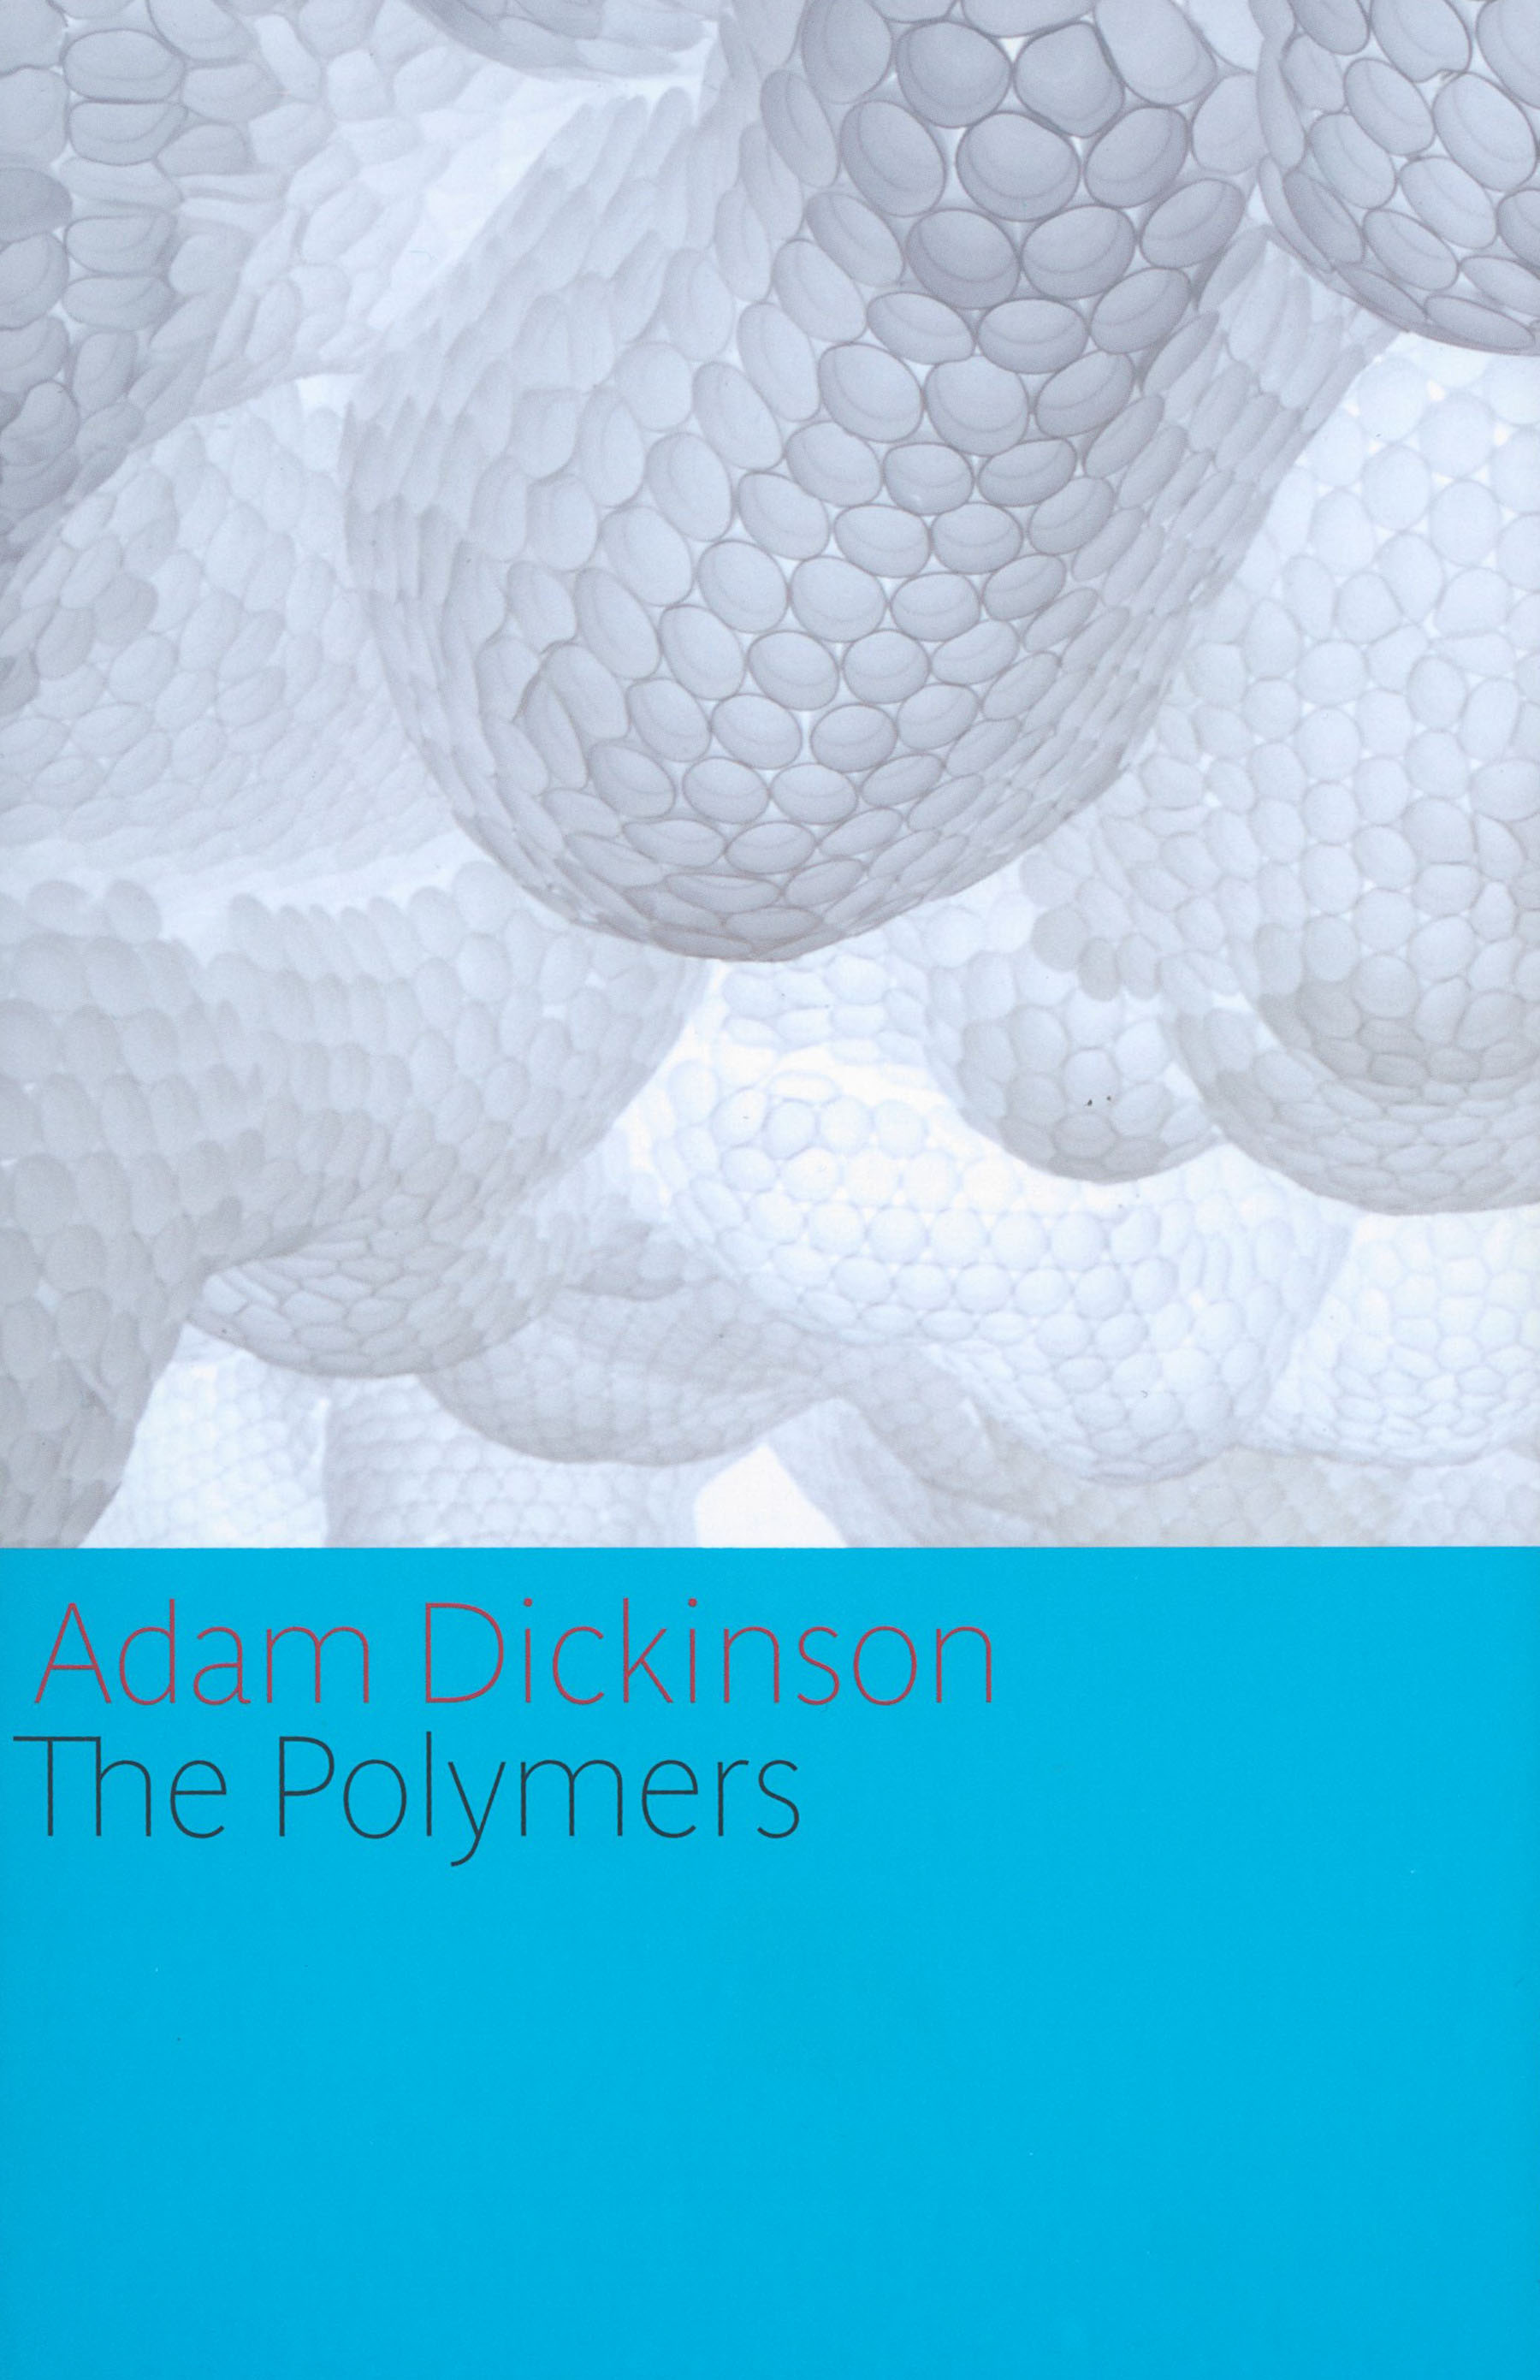 Adam Dickinson: The polymers (2013, House of Anansi Press)